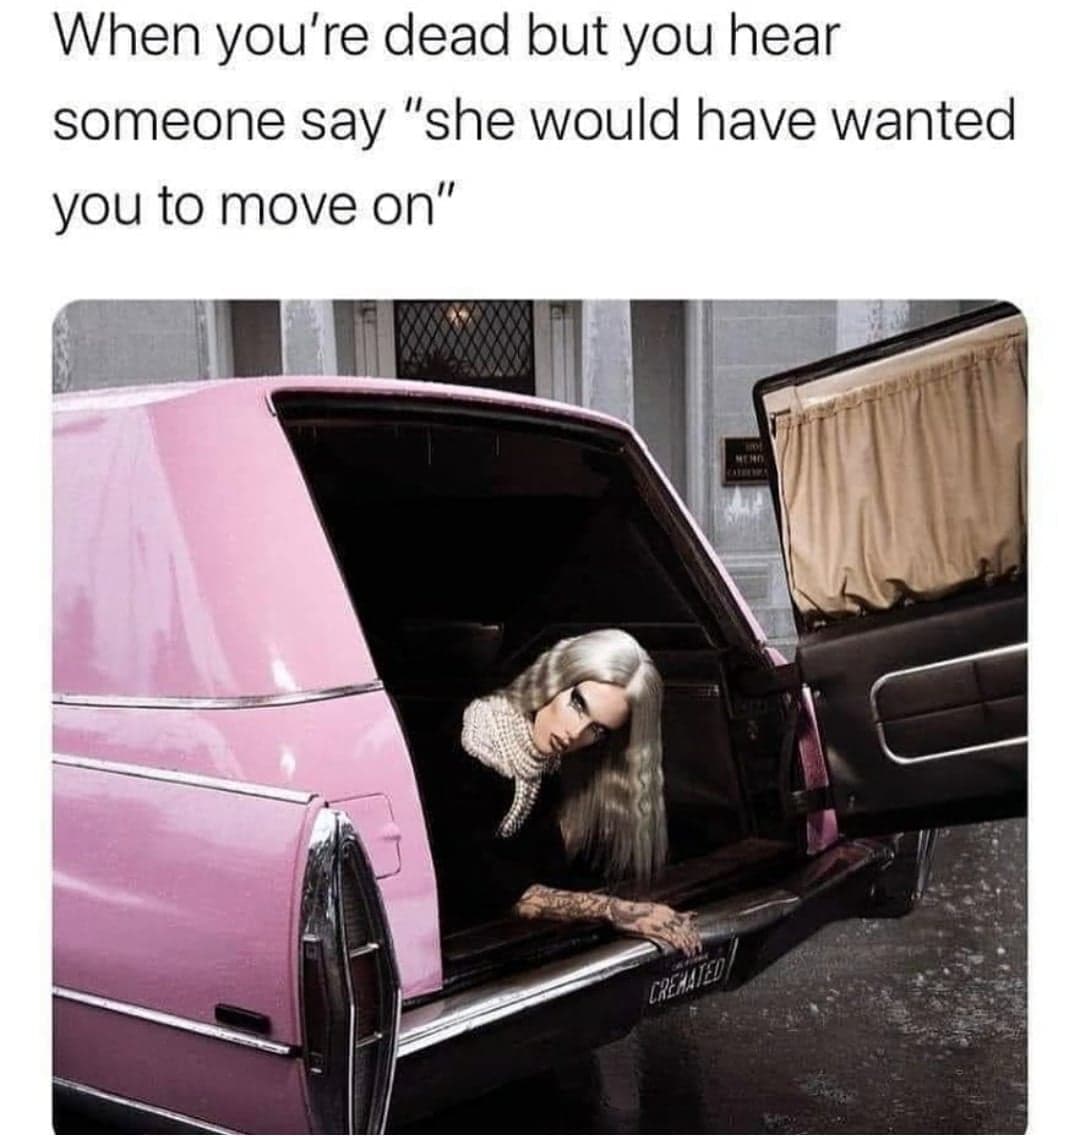 jeffree star cremated meme - When you're dead but you hear someone say "she would have wanted you to move on" Neno Cremated